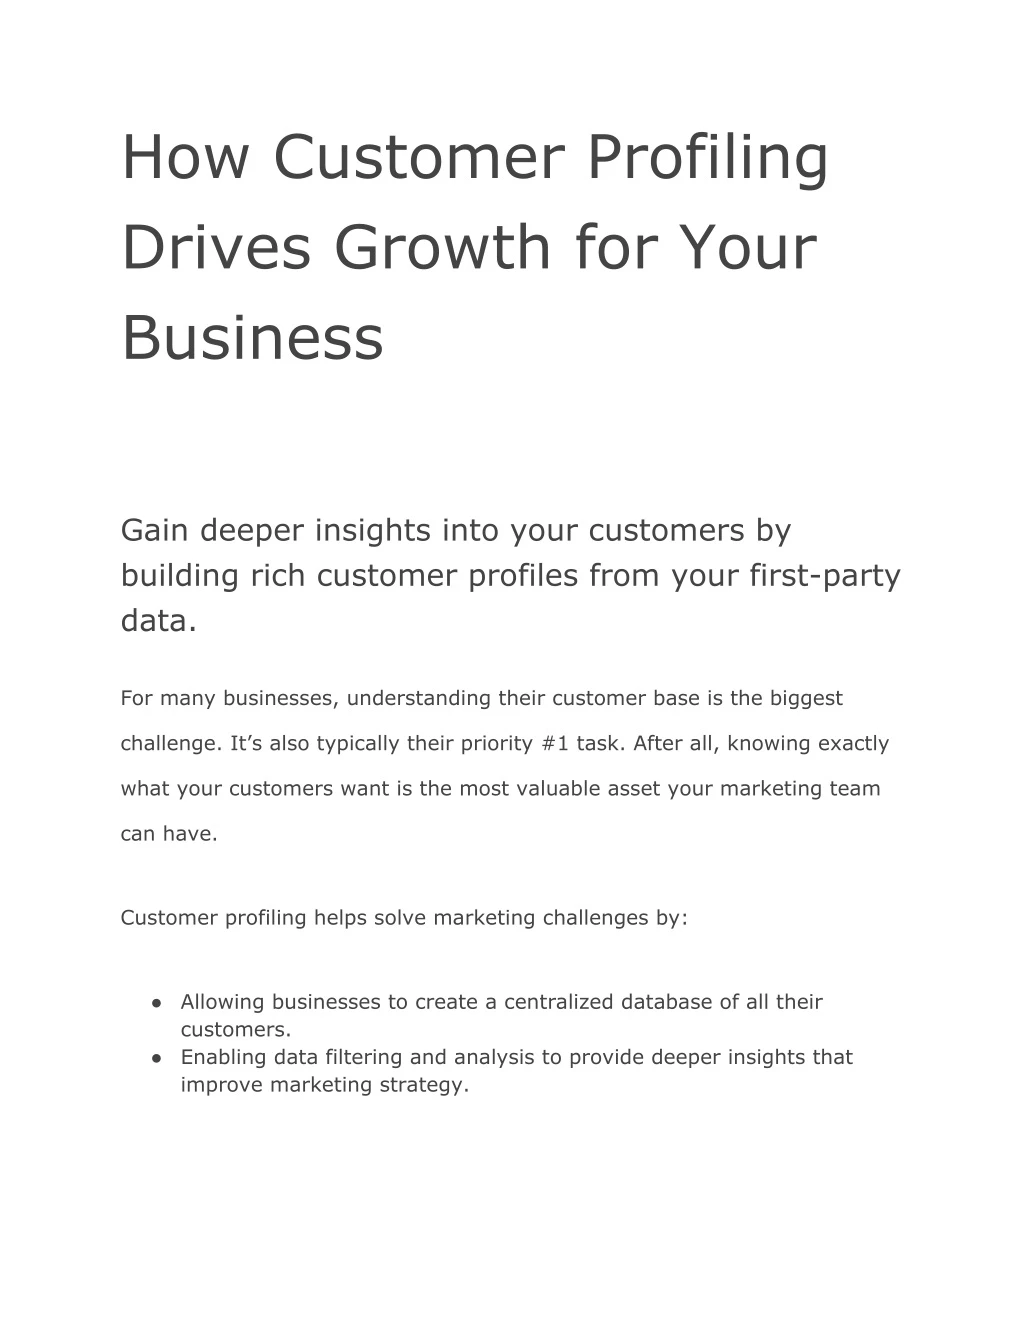 how customer profiling drives growth for your